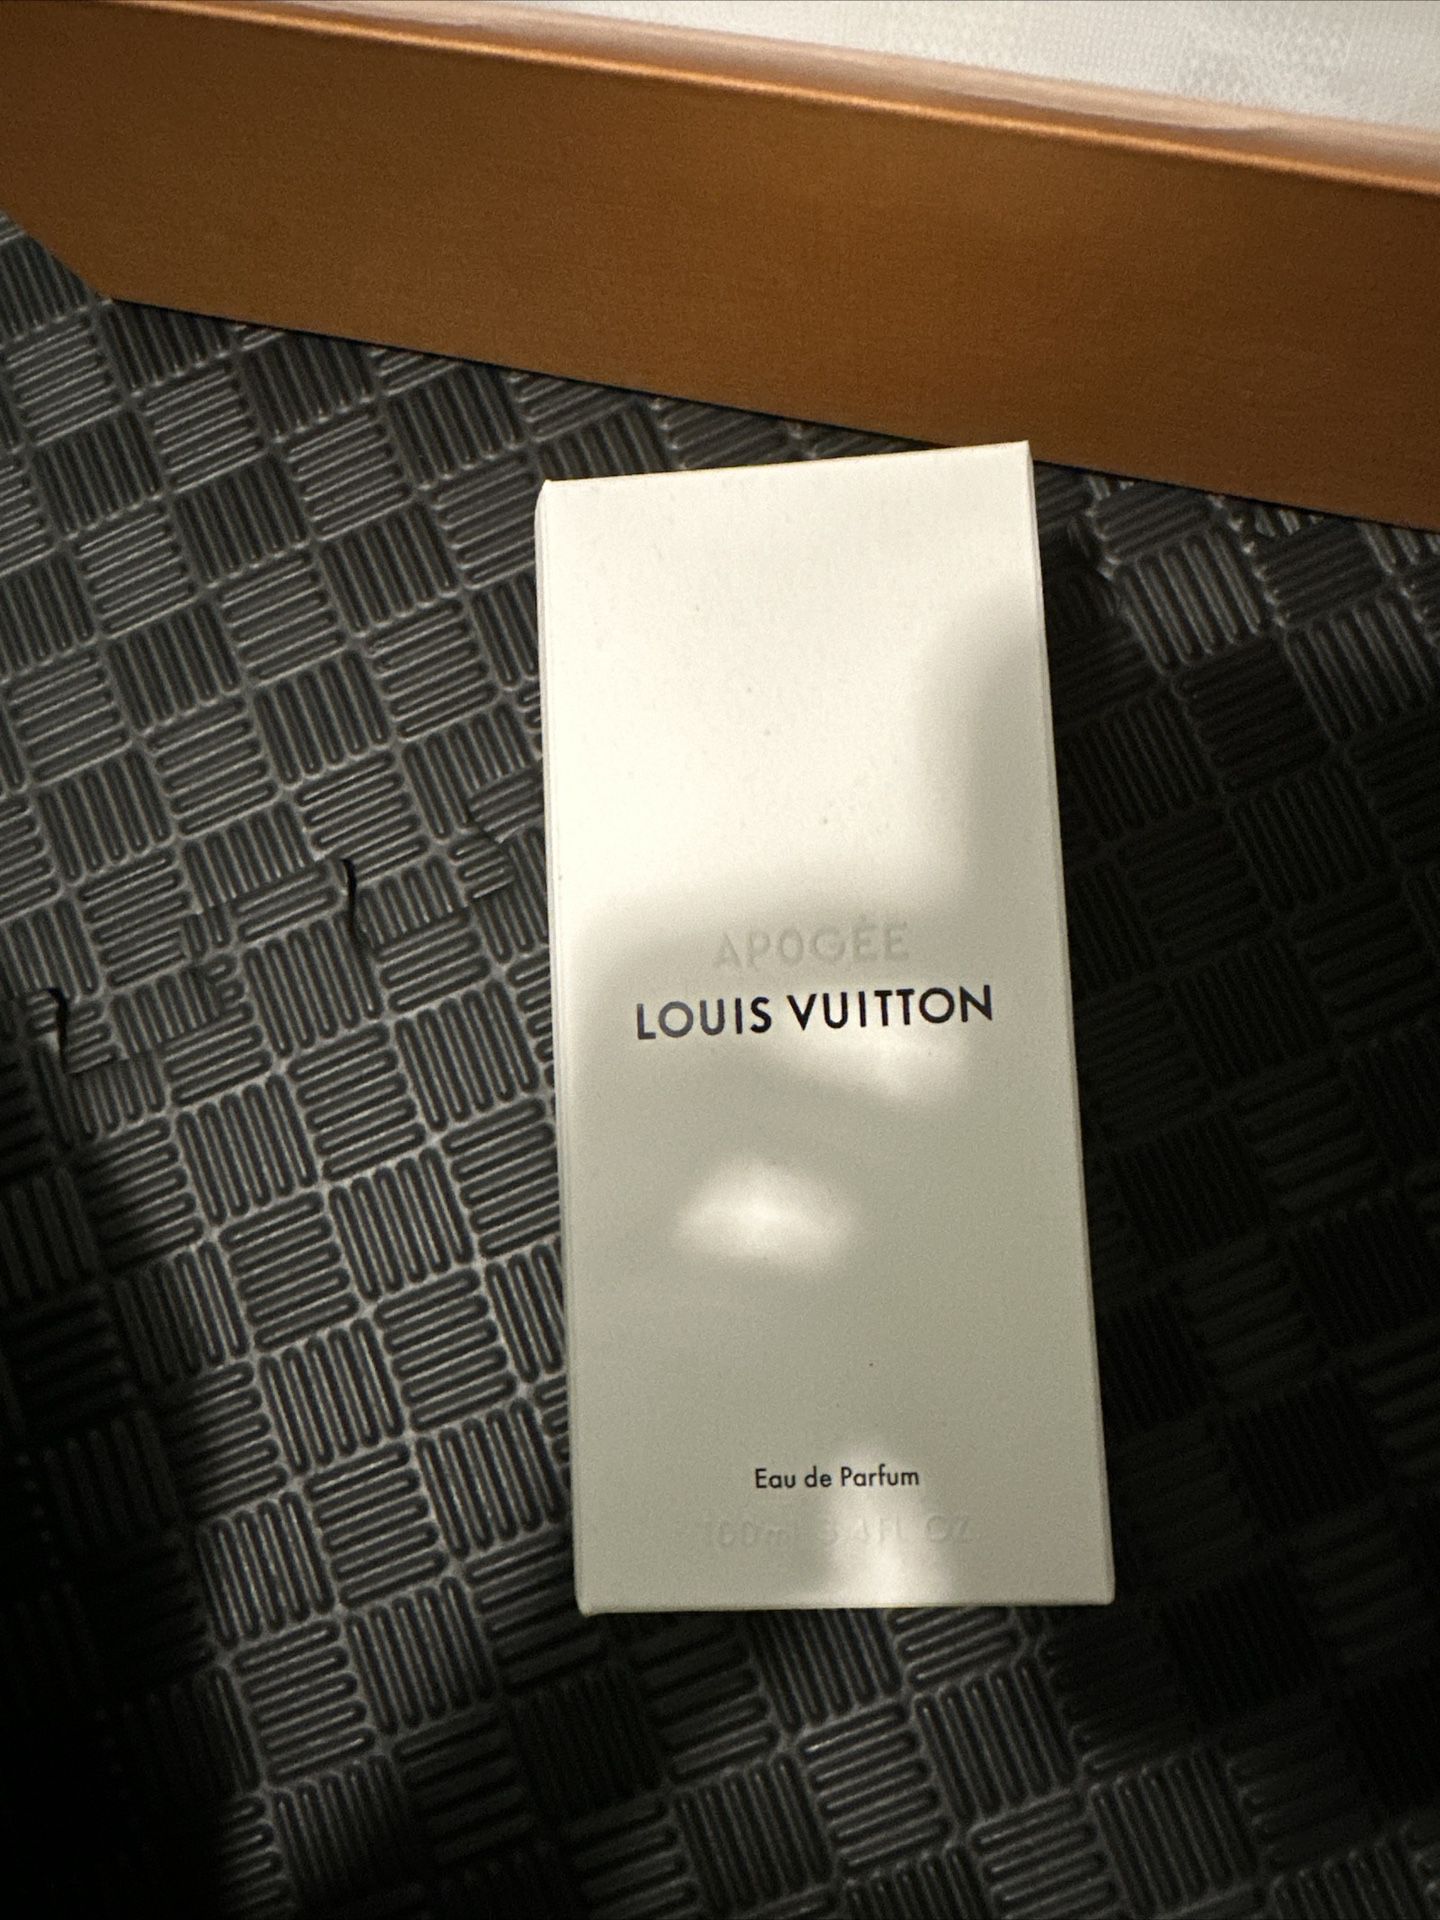 100+ affordable louis vuitton perfume apogee For Sale